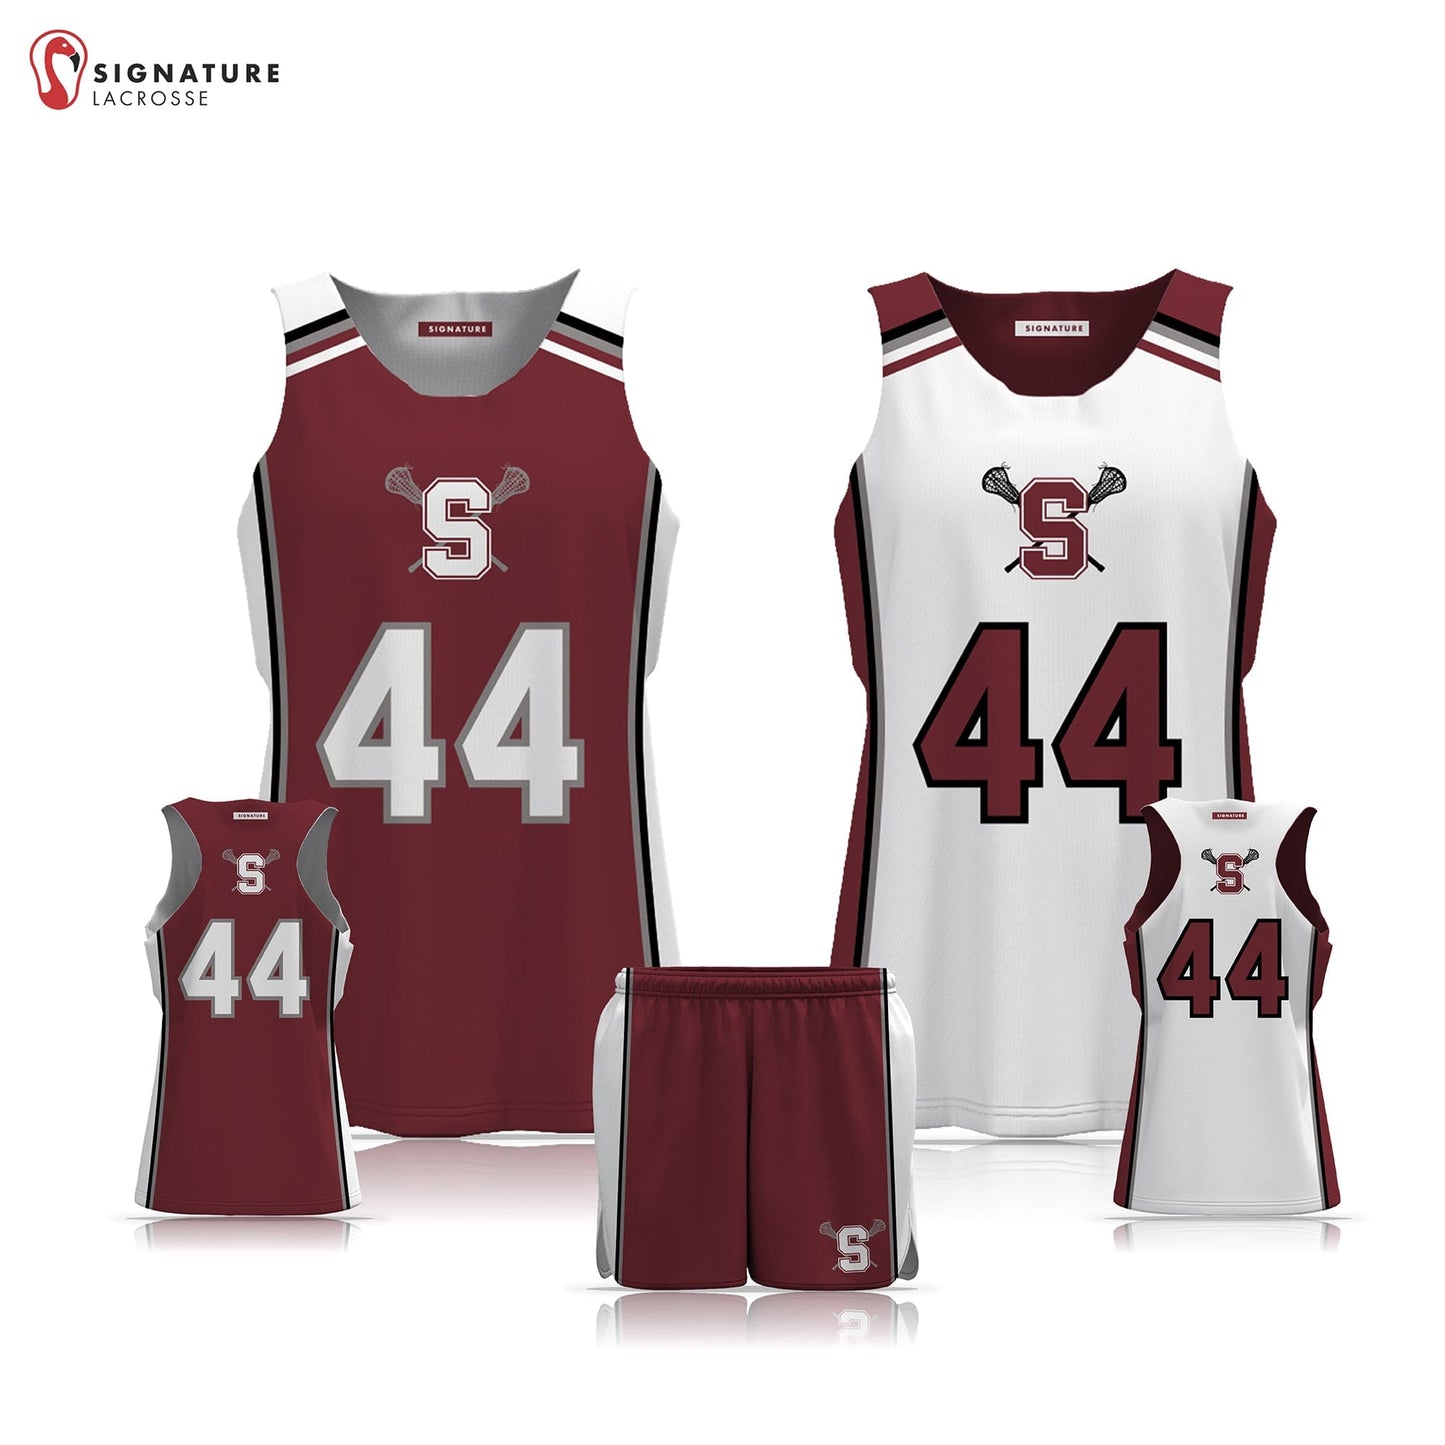 State College Women's 2 Piece Player Game Package: 5-6 Signature Lacrosse